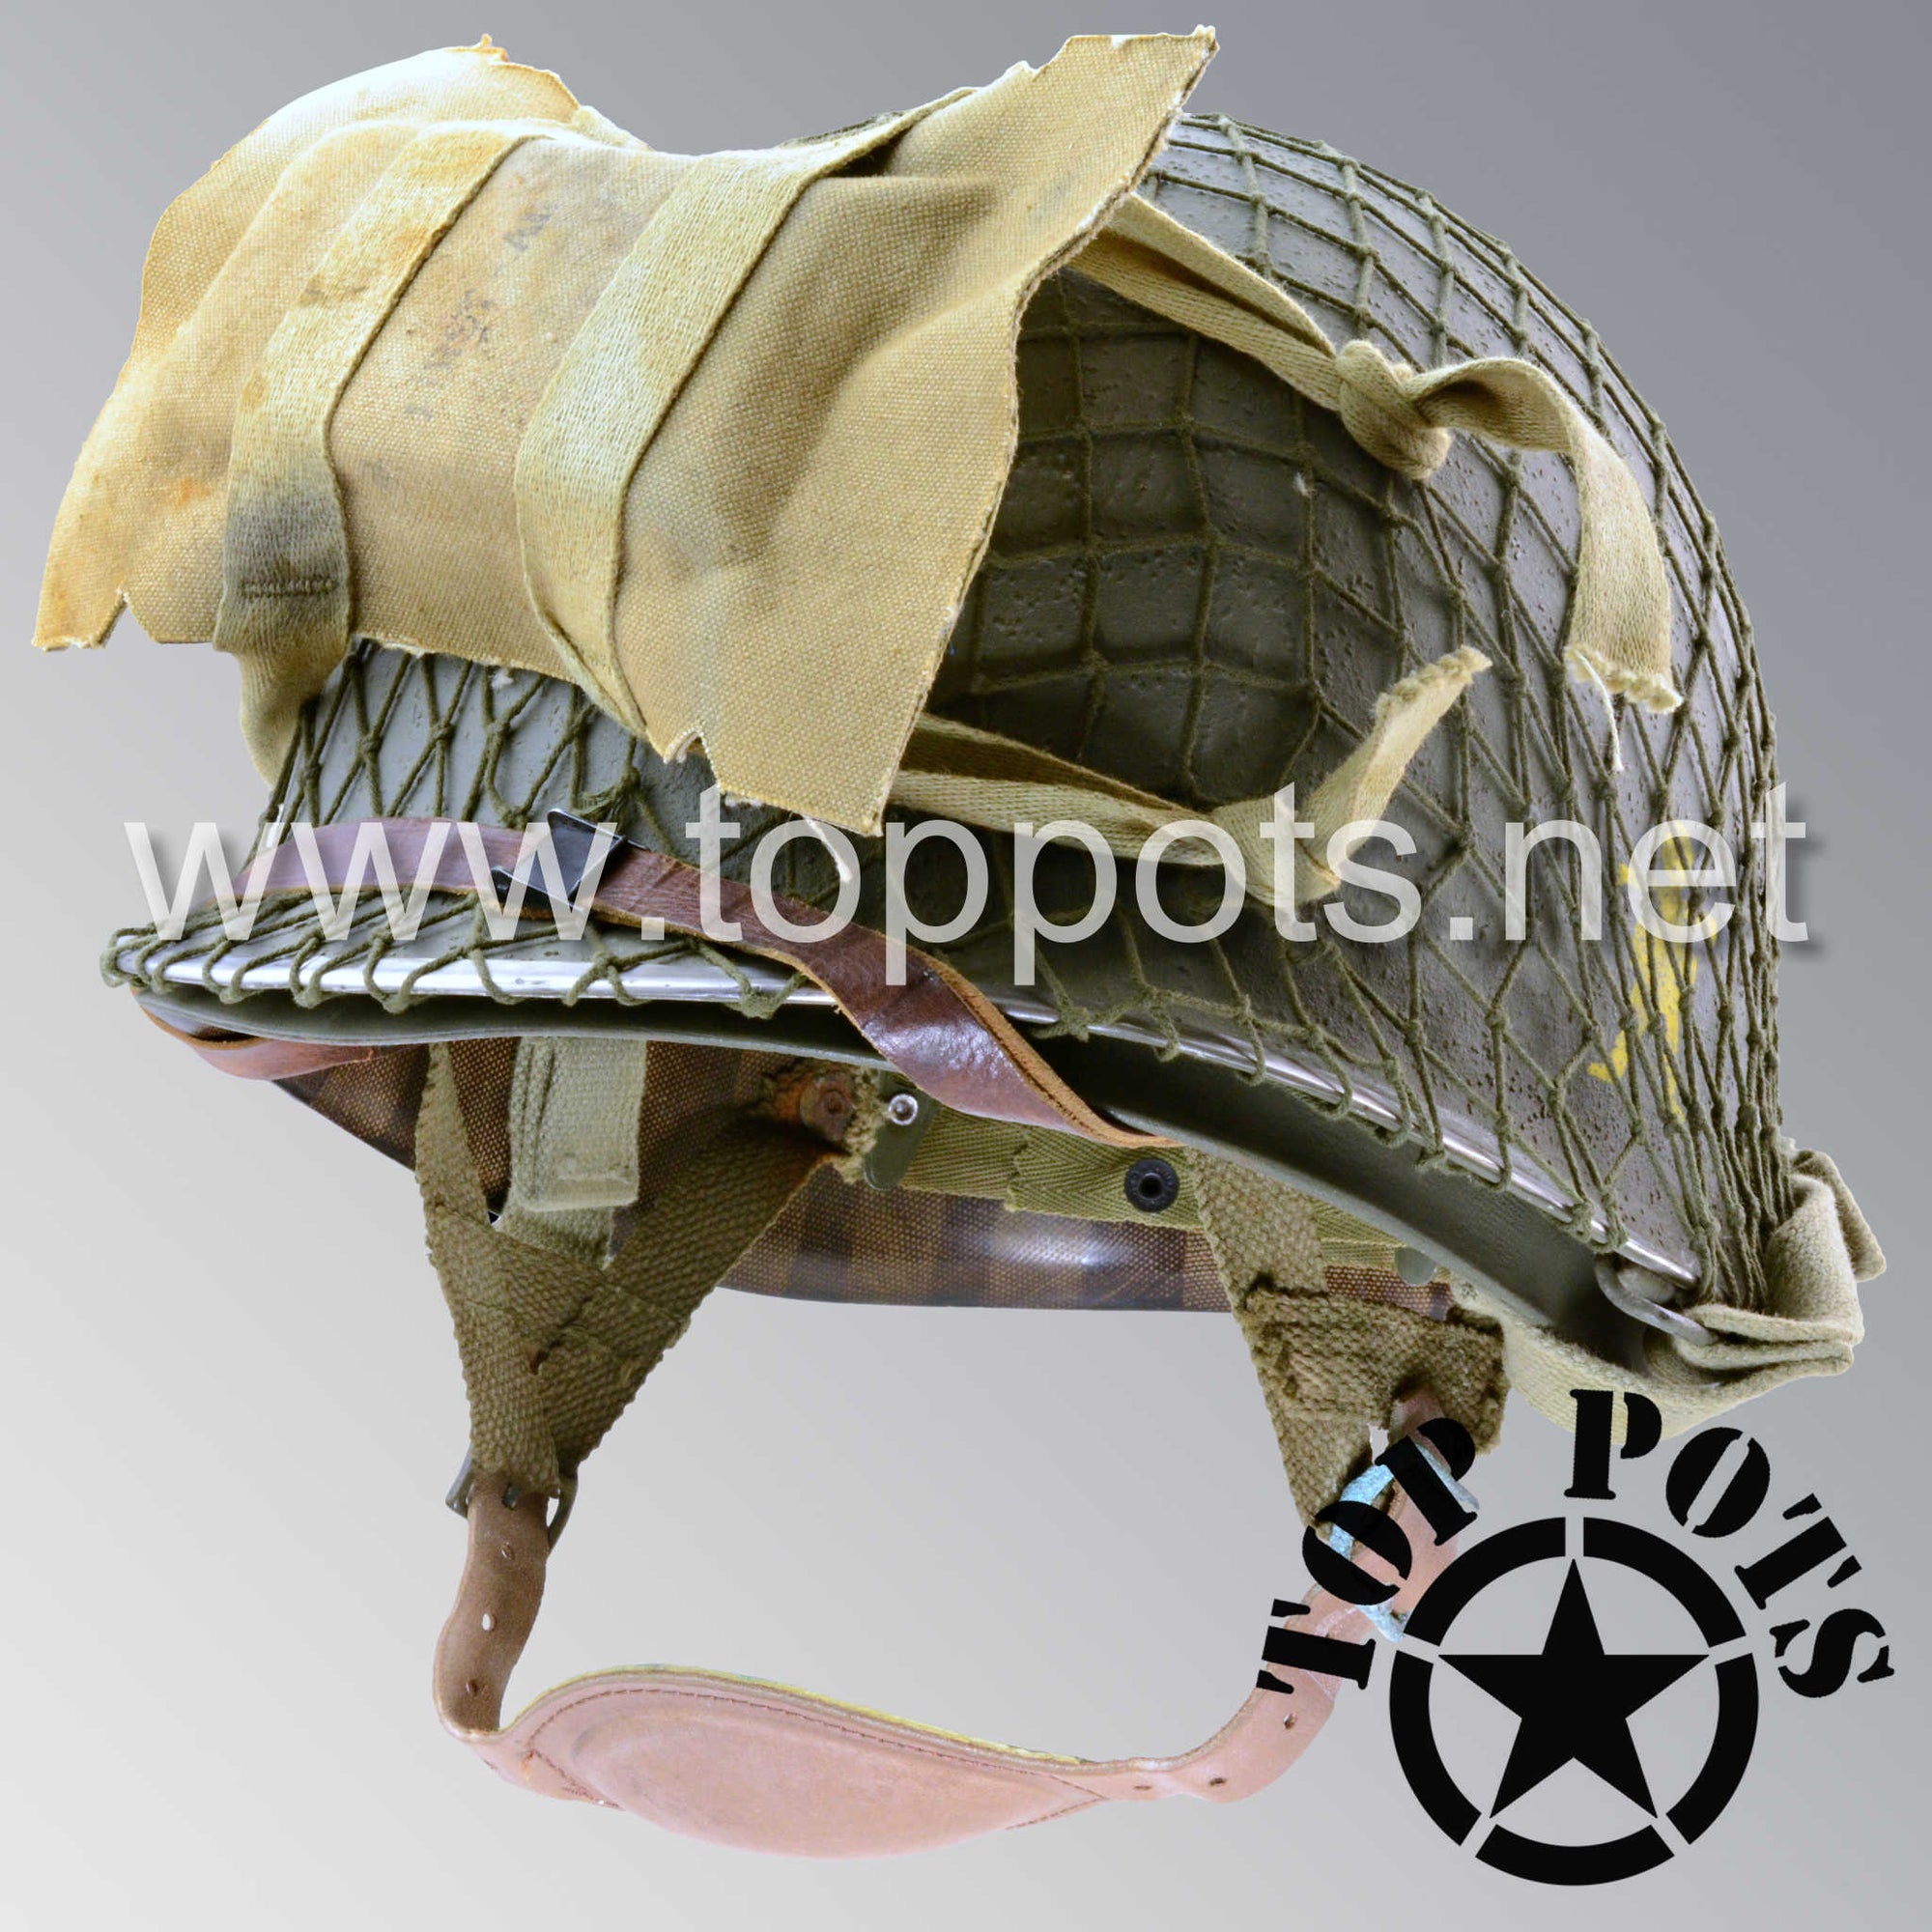 WWII US Army Aged Original M1C Paratrooper Airborne Helmet Swivel Bale Shell and Liner with 509th PIR Emblem, Net and Medic Pack